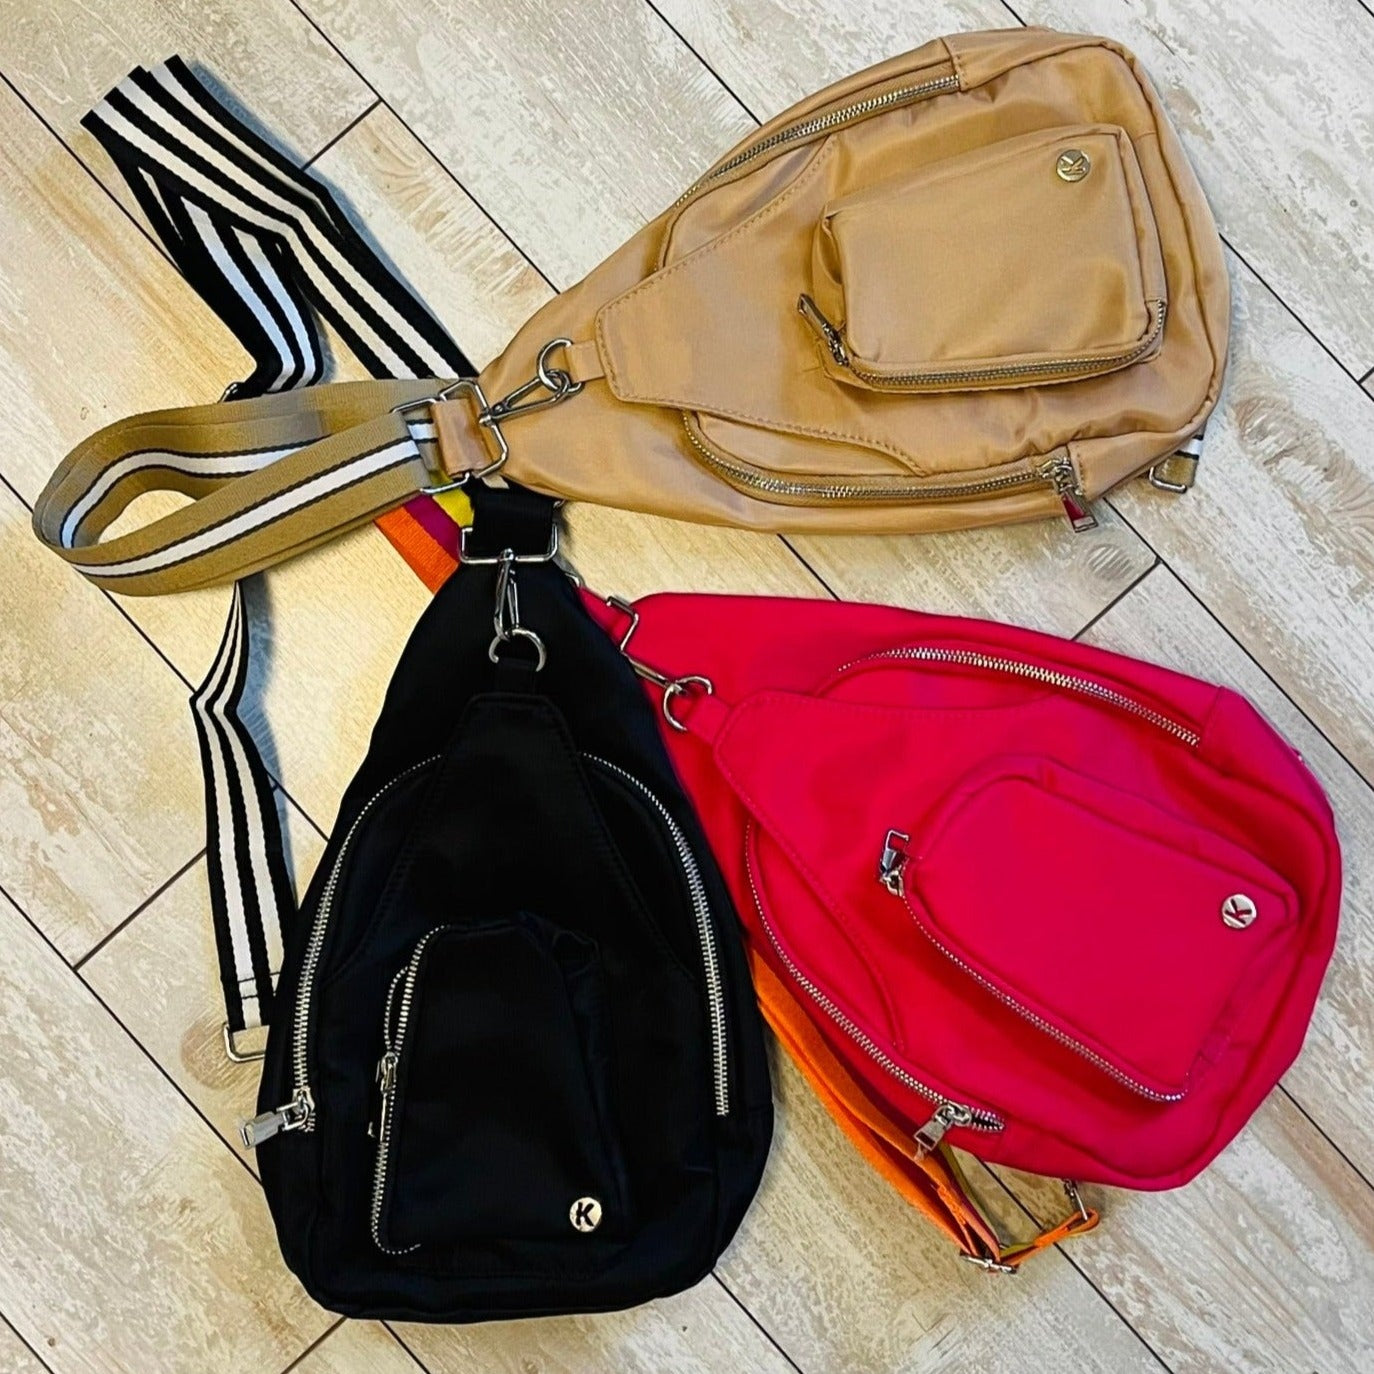 sling bag with striped strap